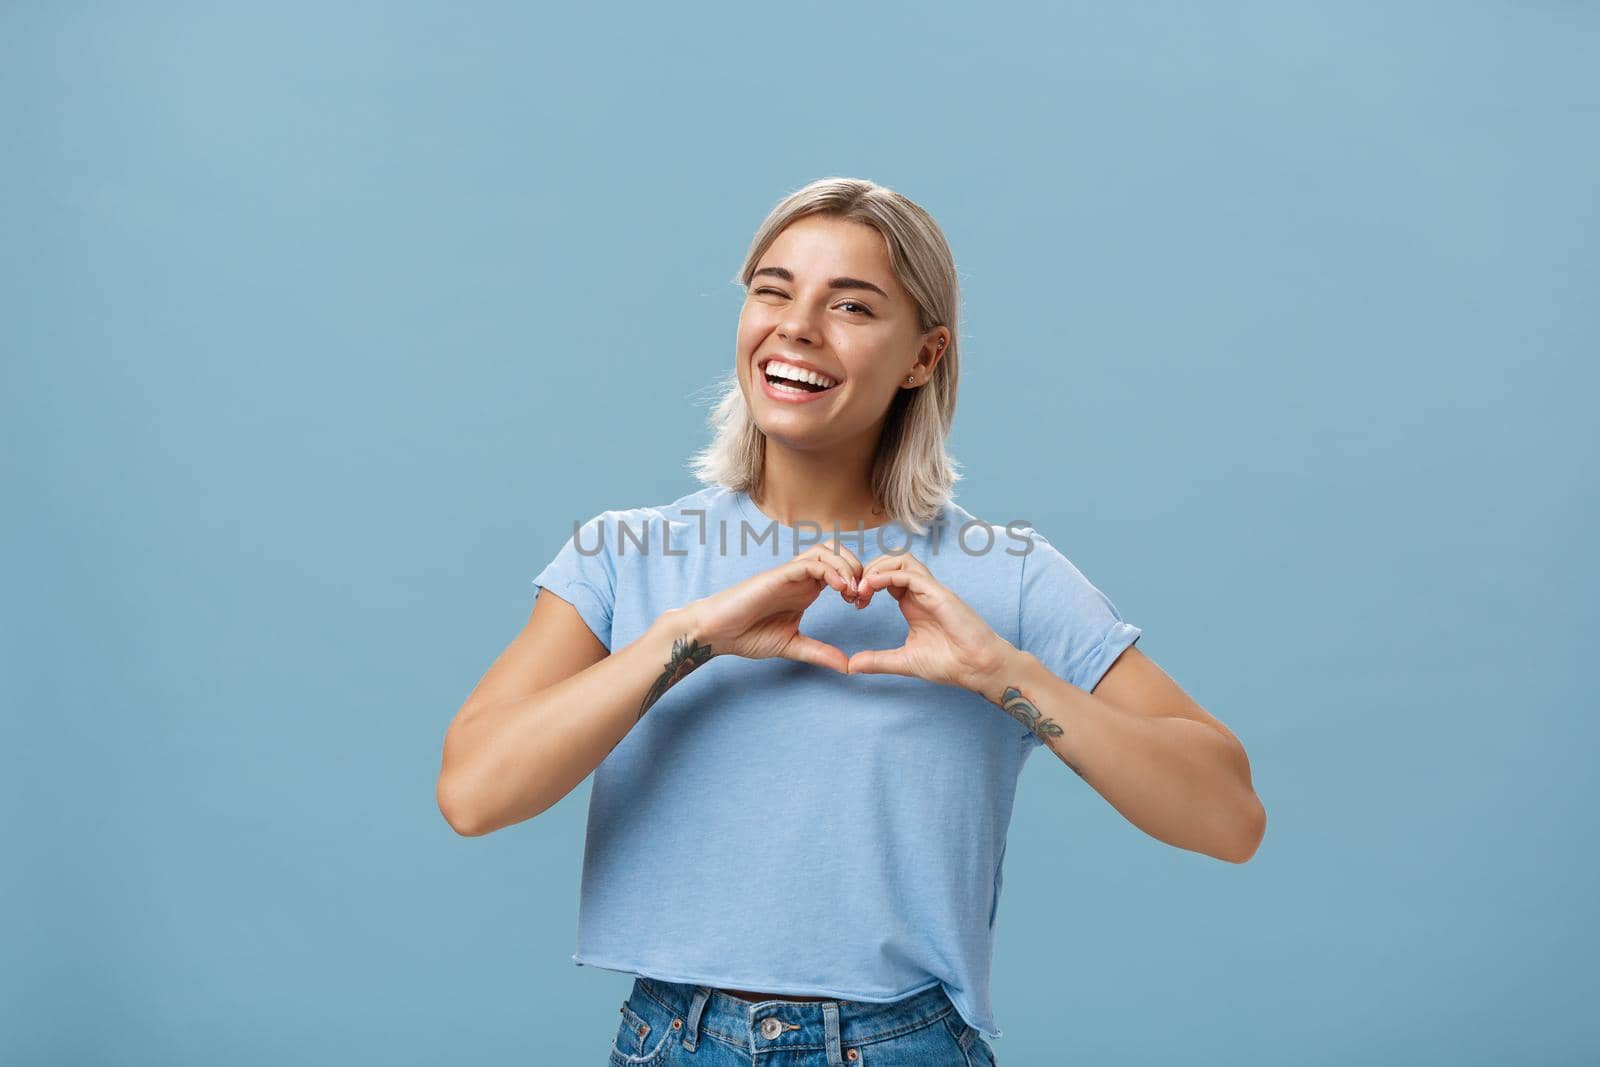 Love relationship and emotions concept. Joyful charming feminine girl with fair hair in trendy t-shirt winking happily smiling broadly and making heart gesture over breast expressing affection.